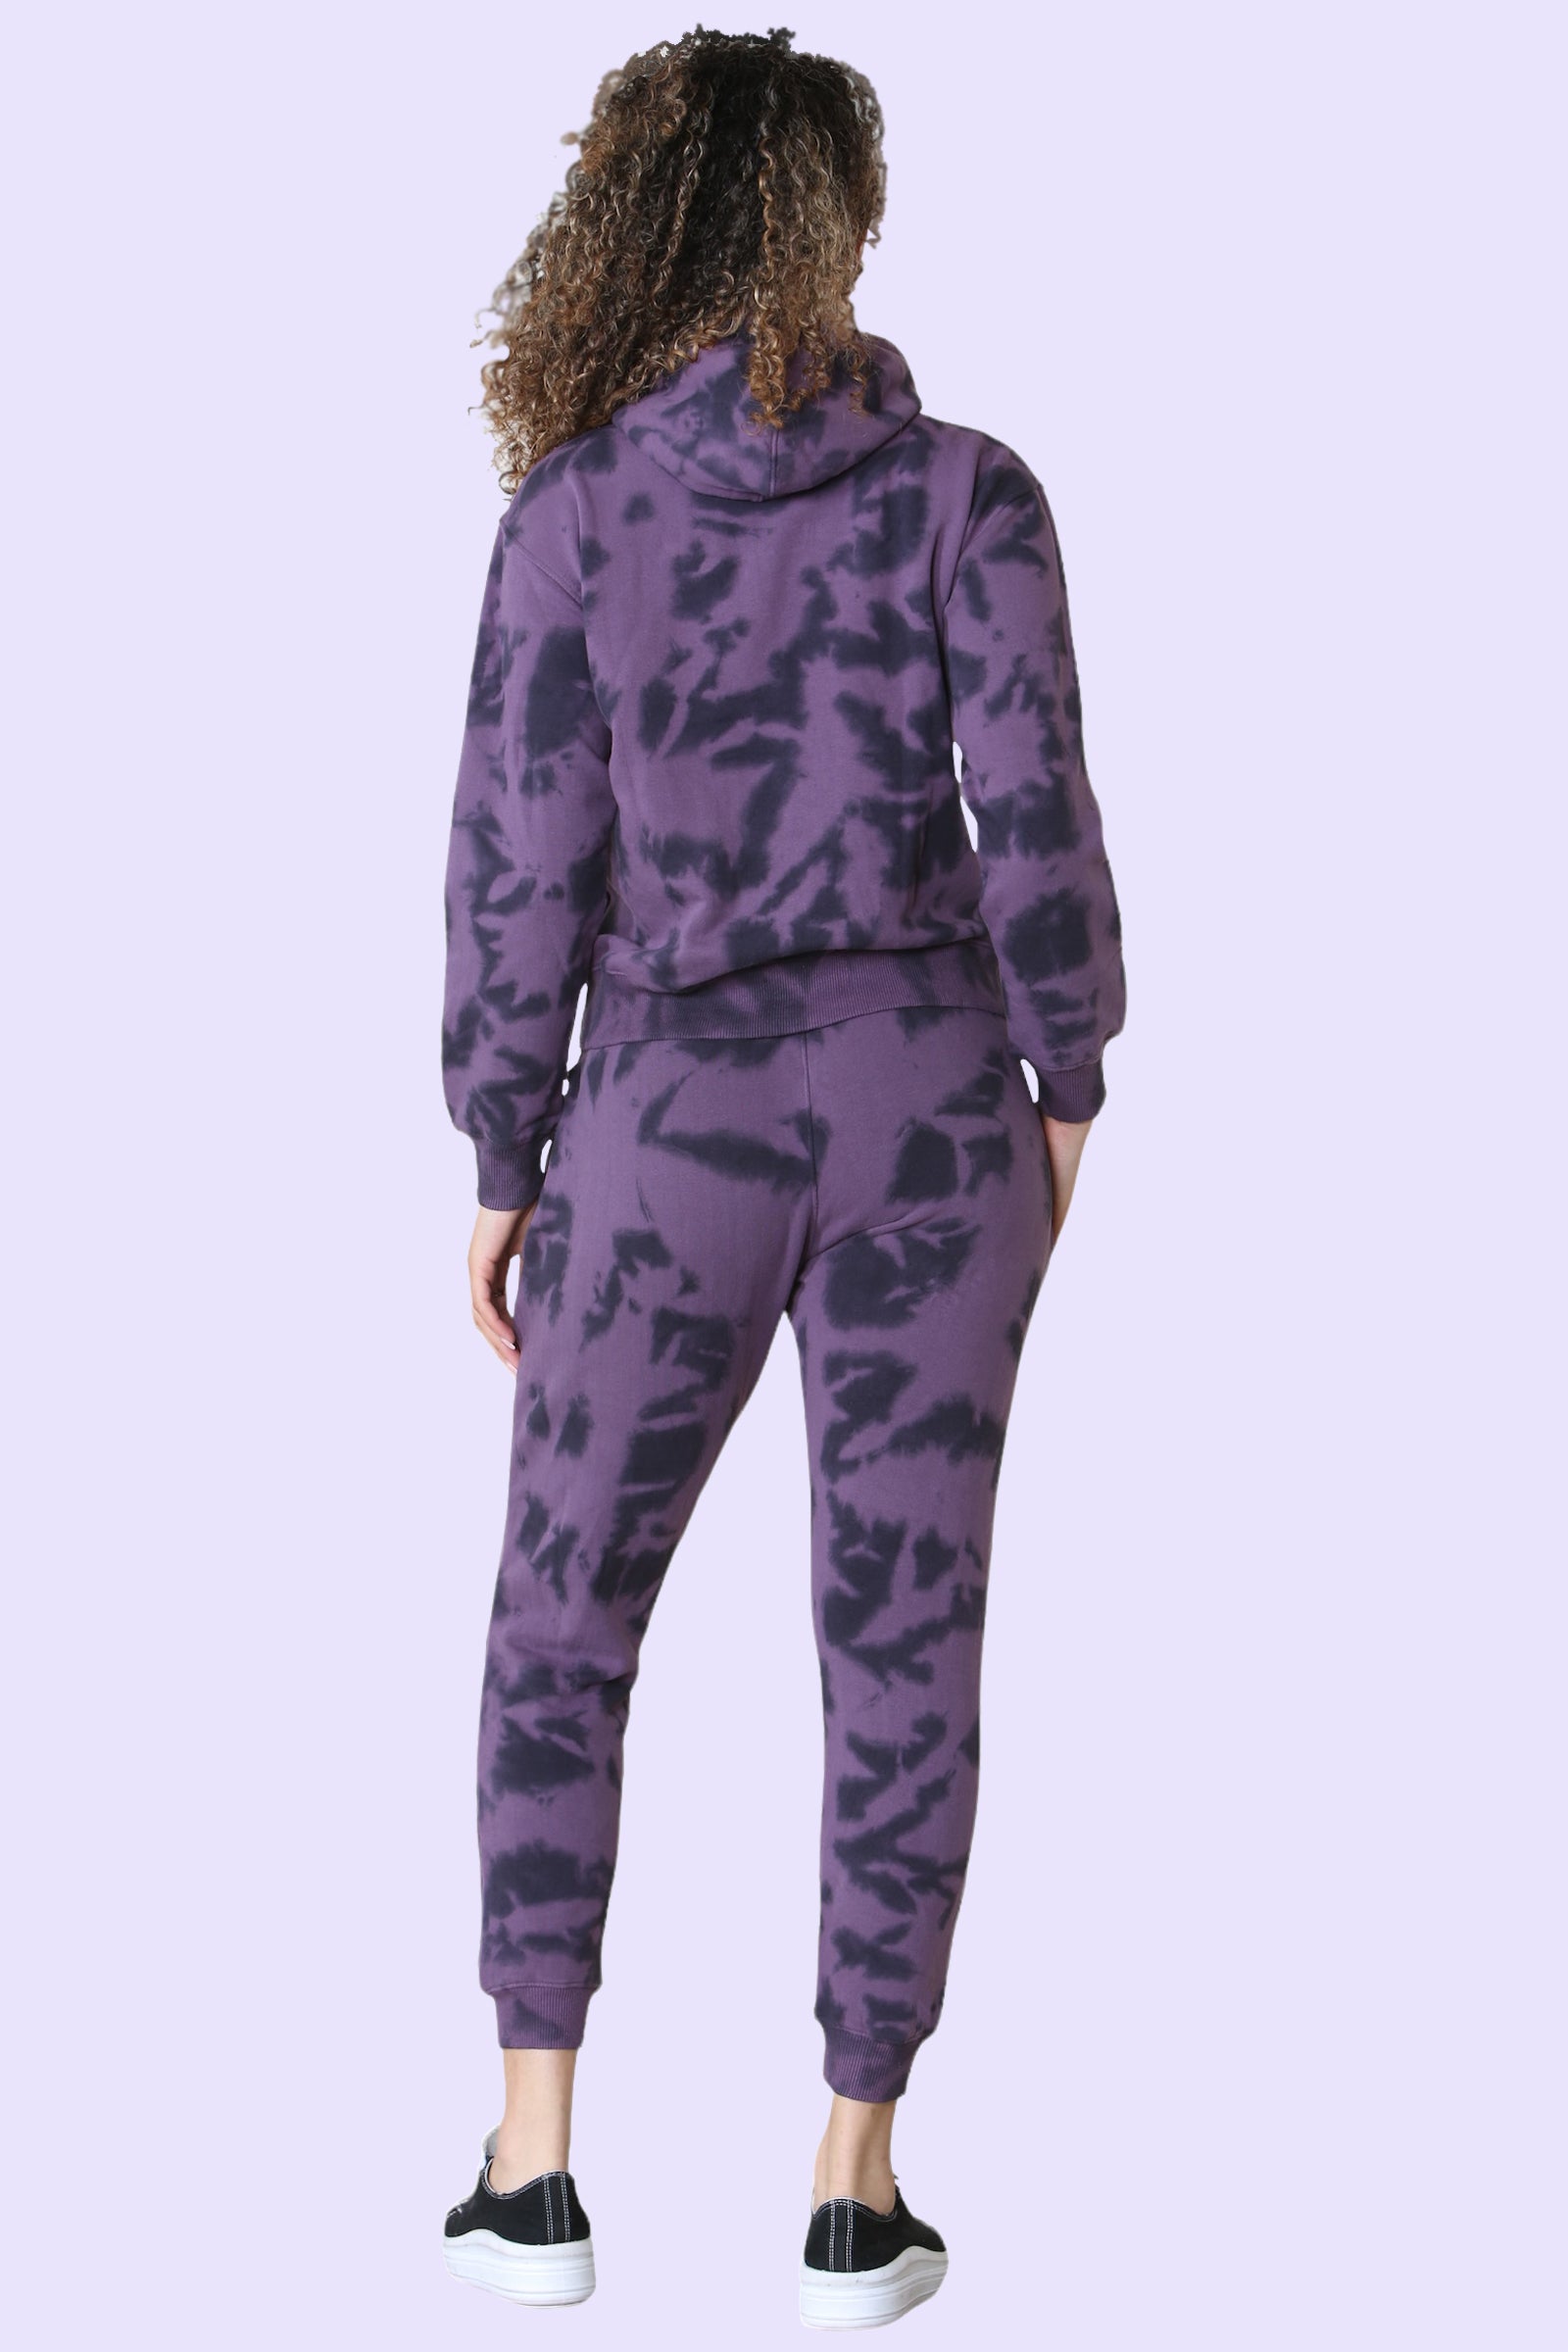 Womens tracksuit